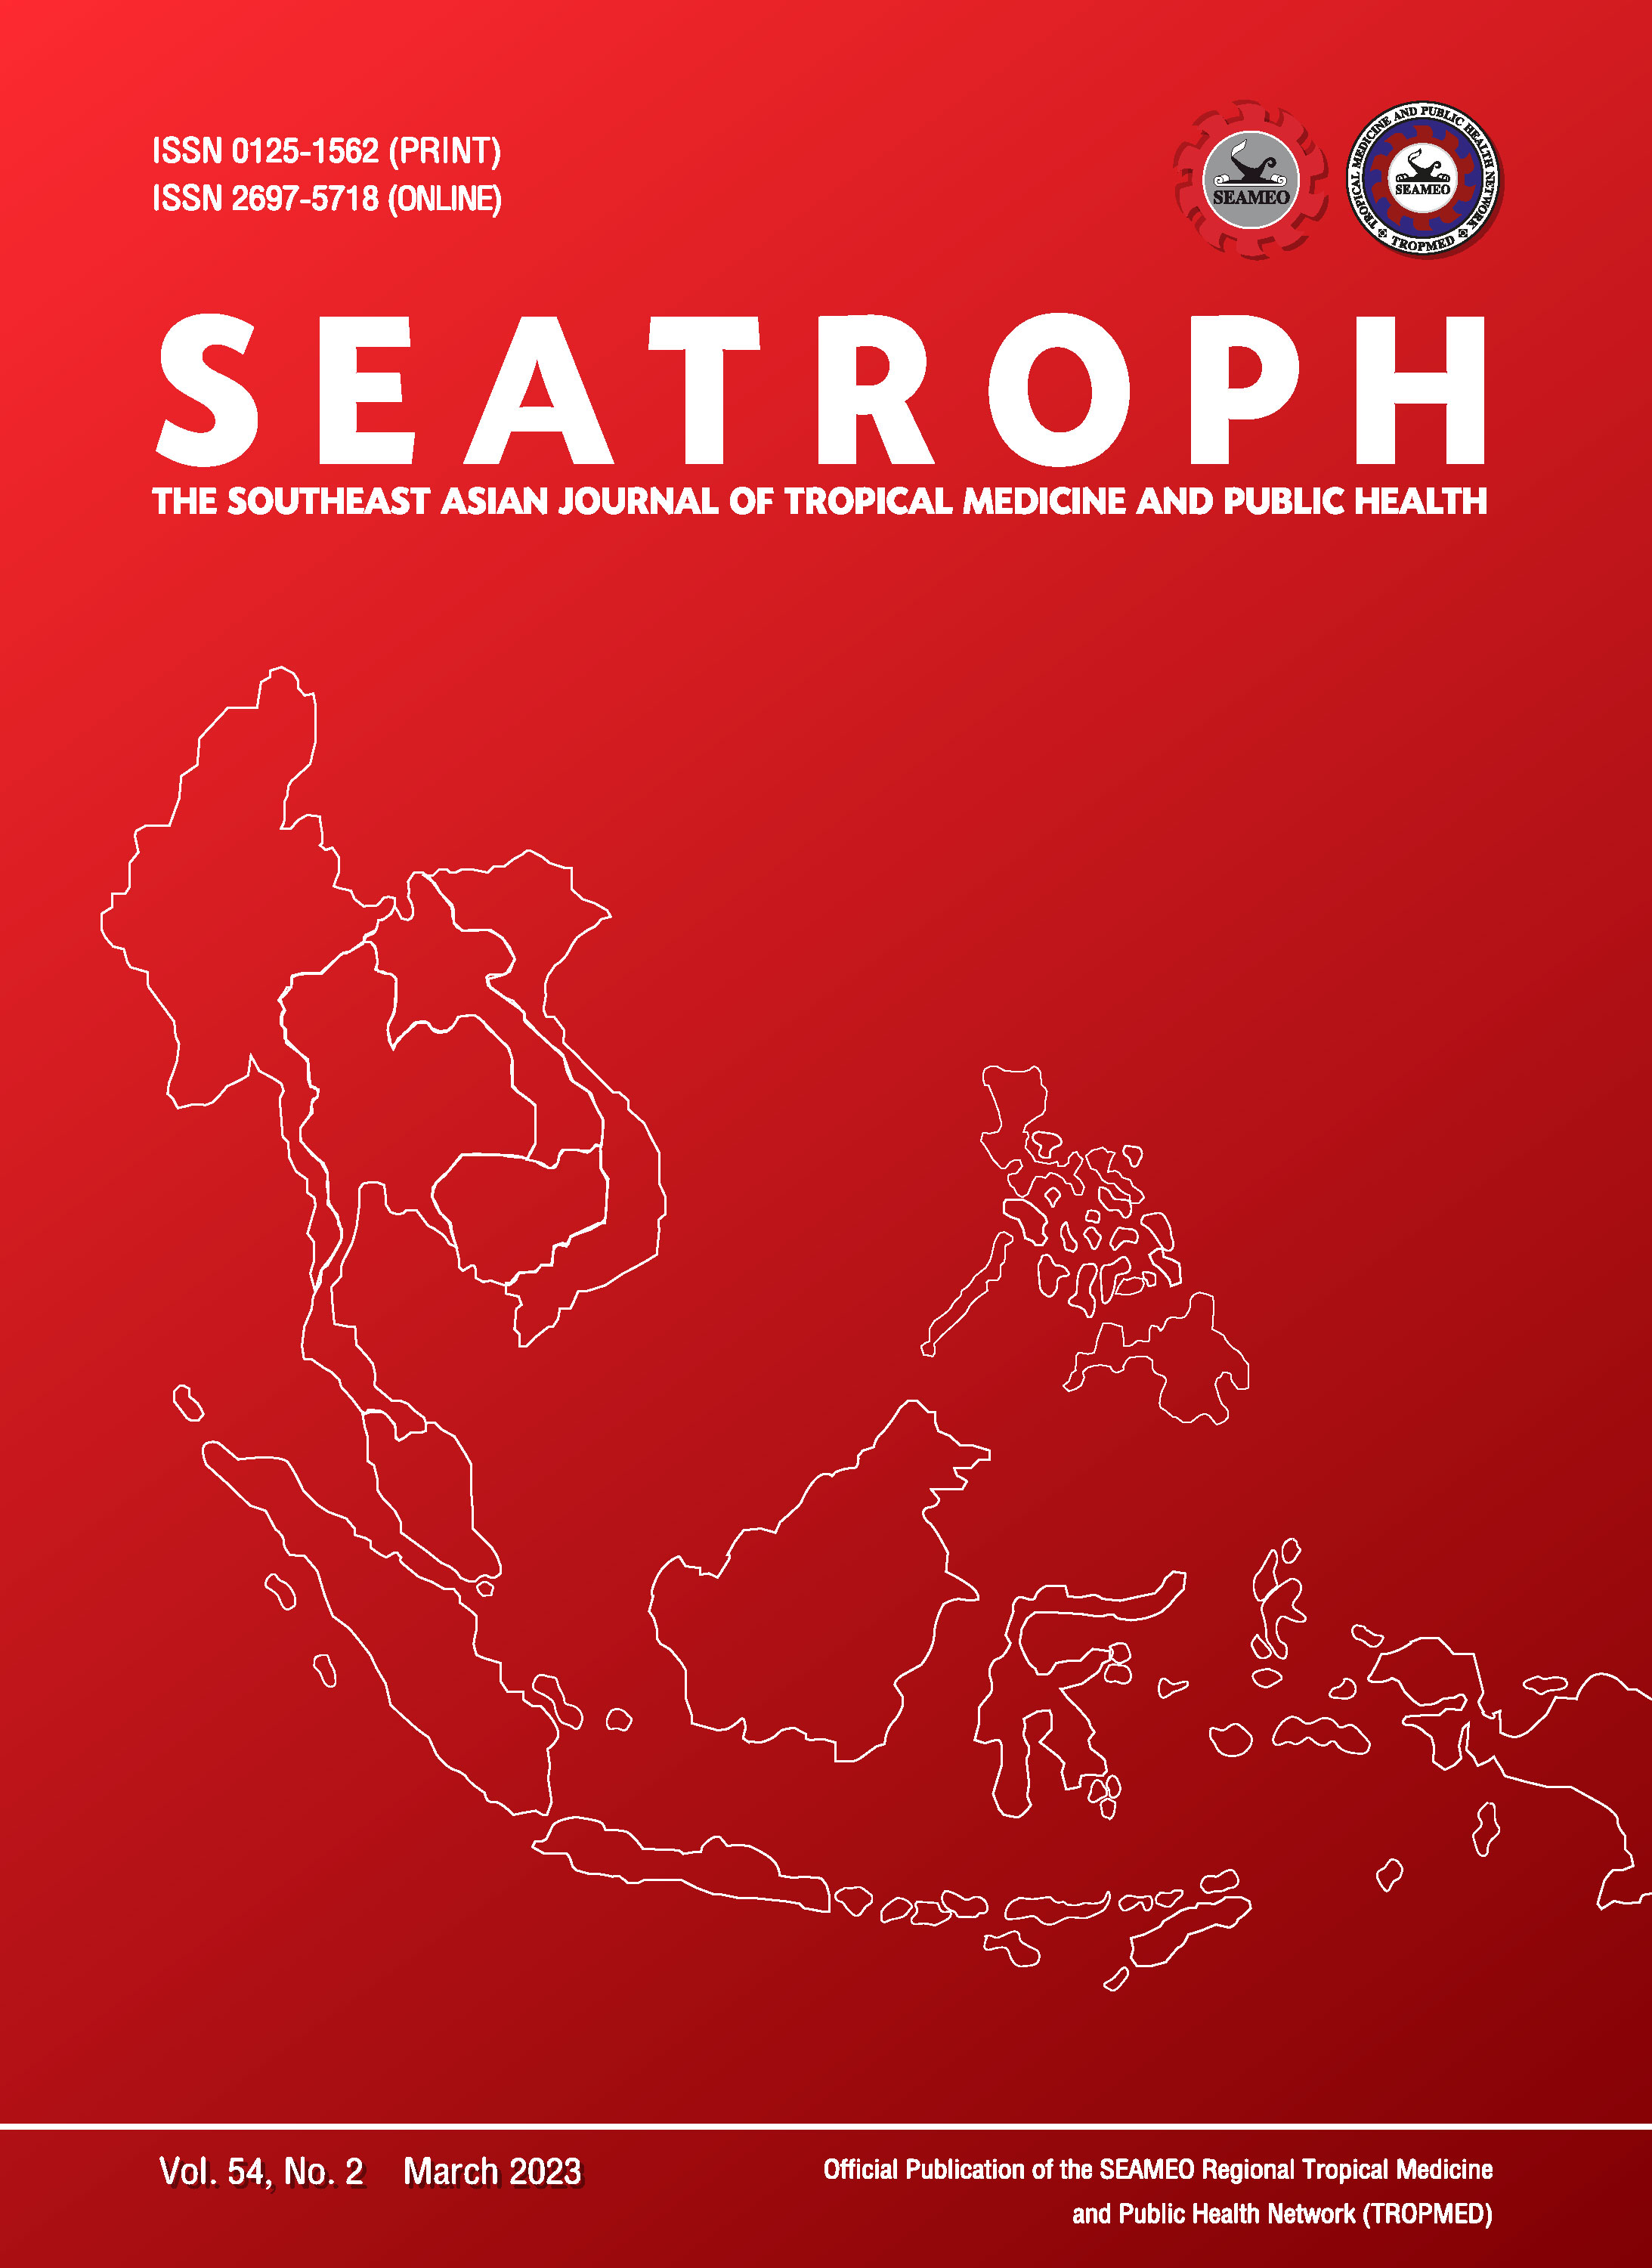 					View Vol. 54 No. 2 (2023): THE SOUTHEAST ASIAN JOURNAL OF TROPICAL MEDICINE AND PUBLIC HEALTH
				